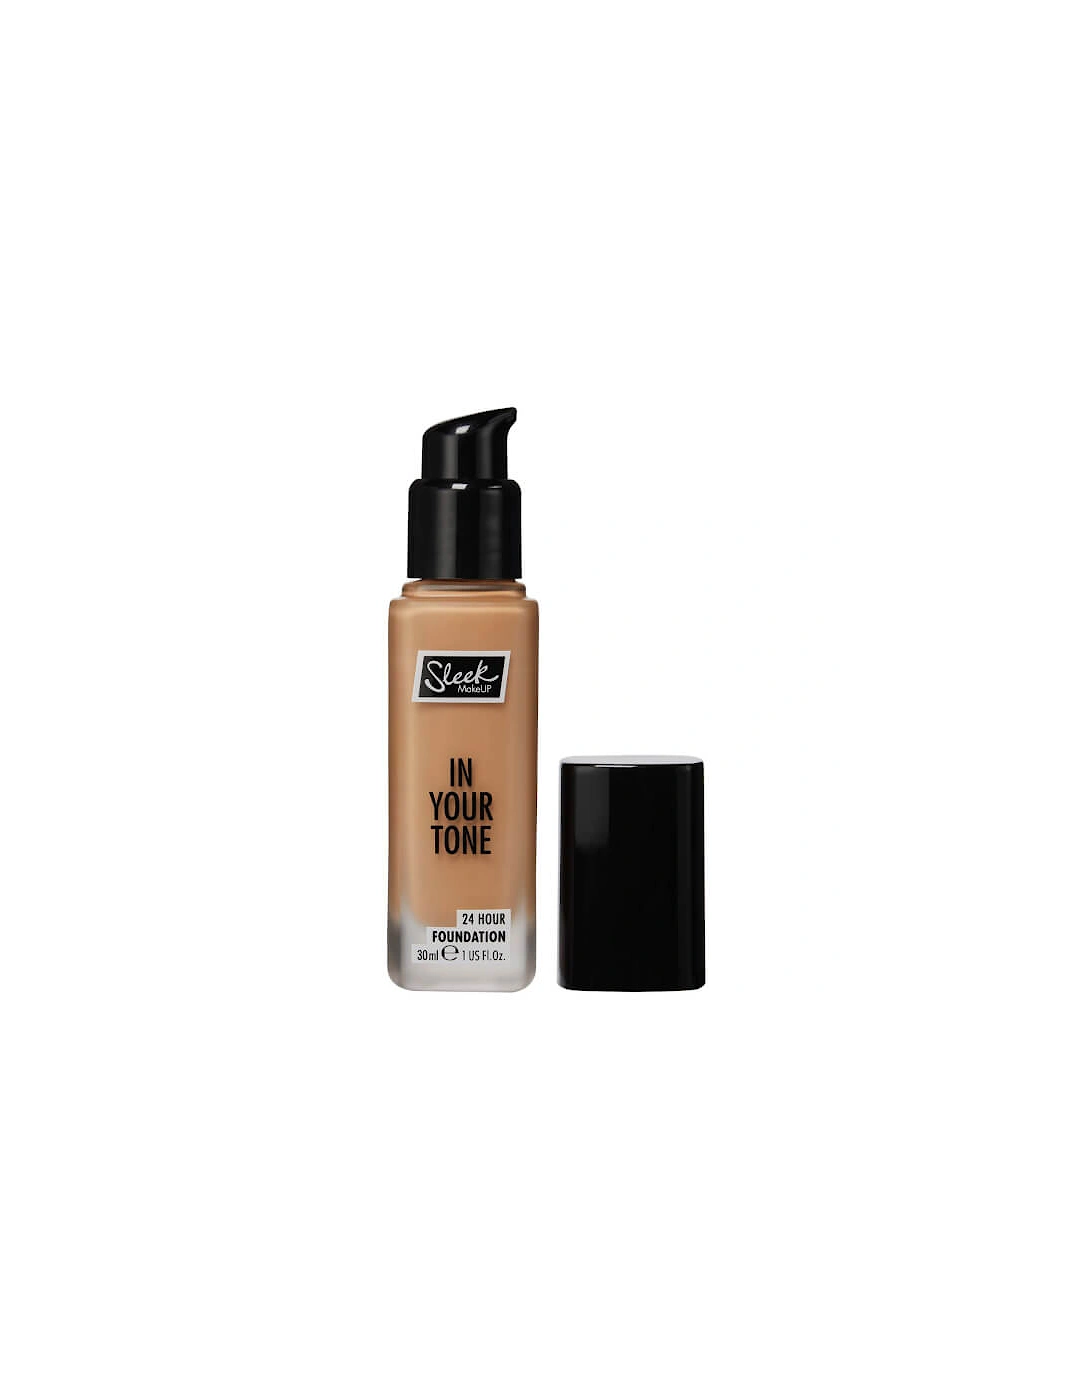 in Your Tone 24 Hour Foundation - 6N, 2 of 1